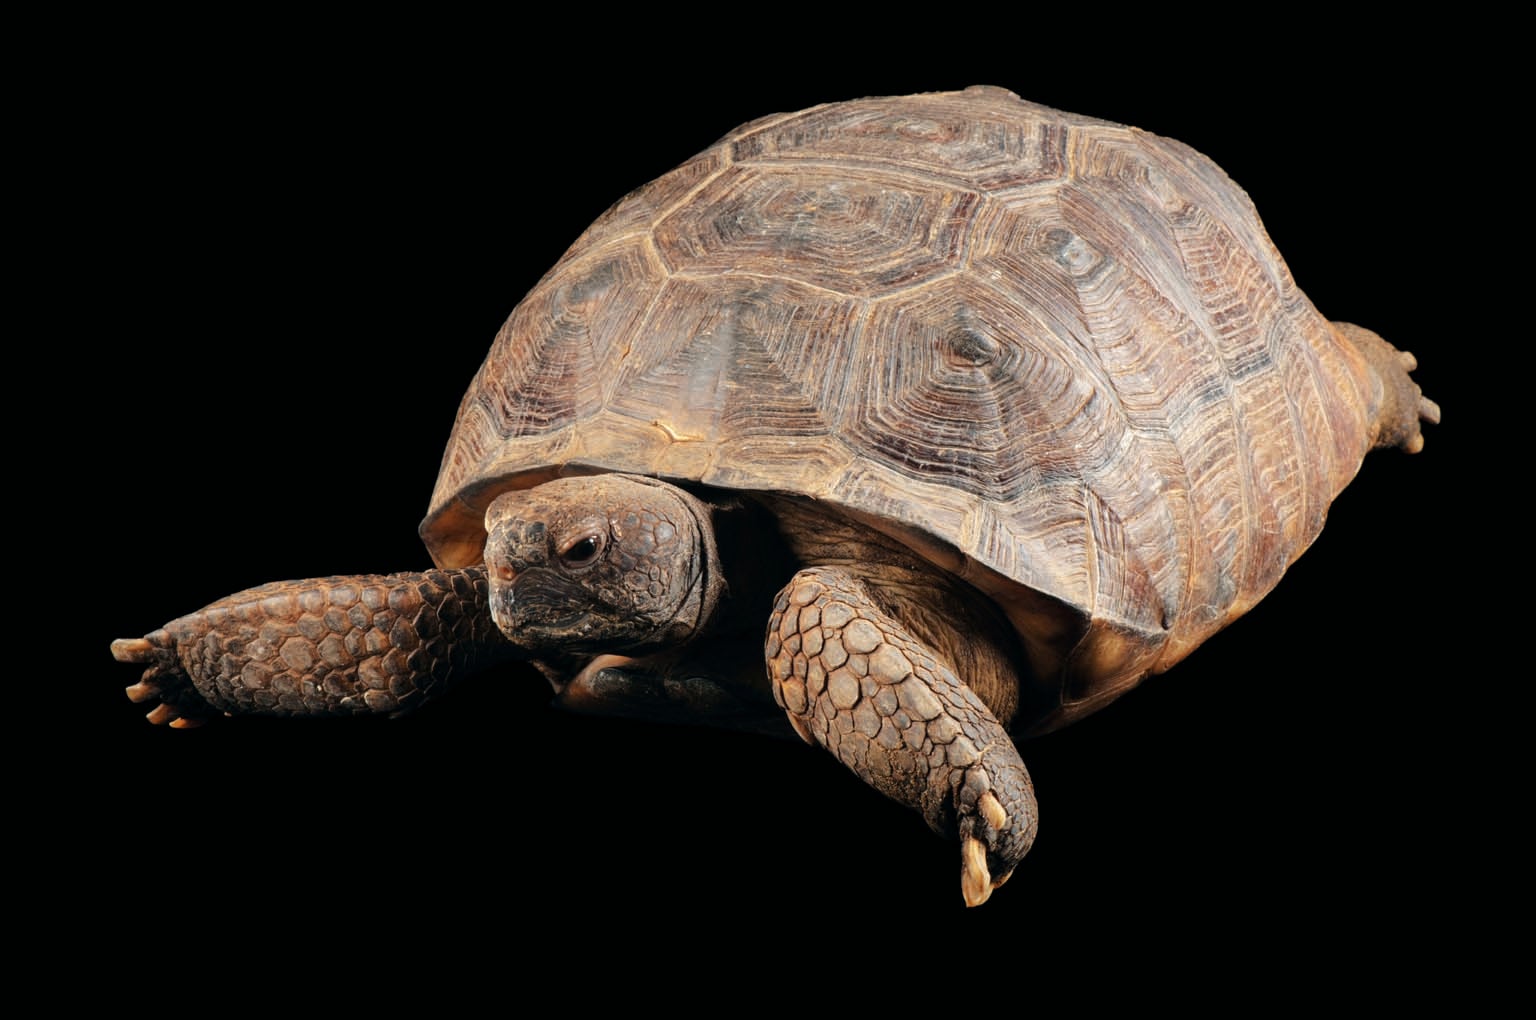 A large brown tortoise shown against a black background.